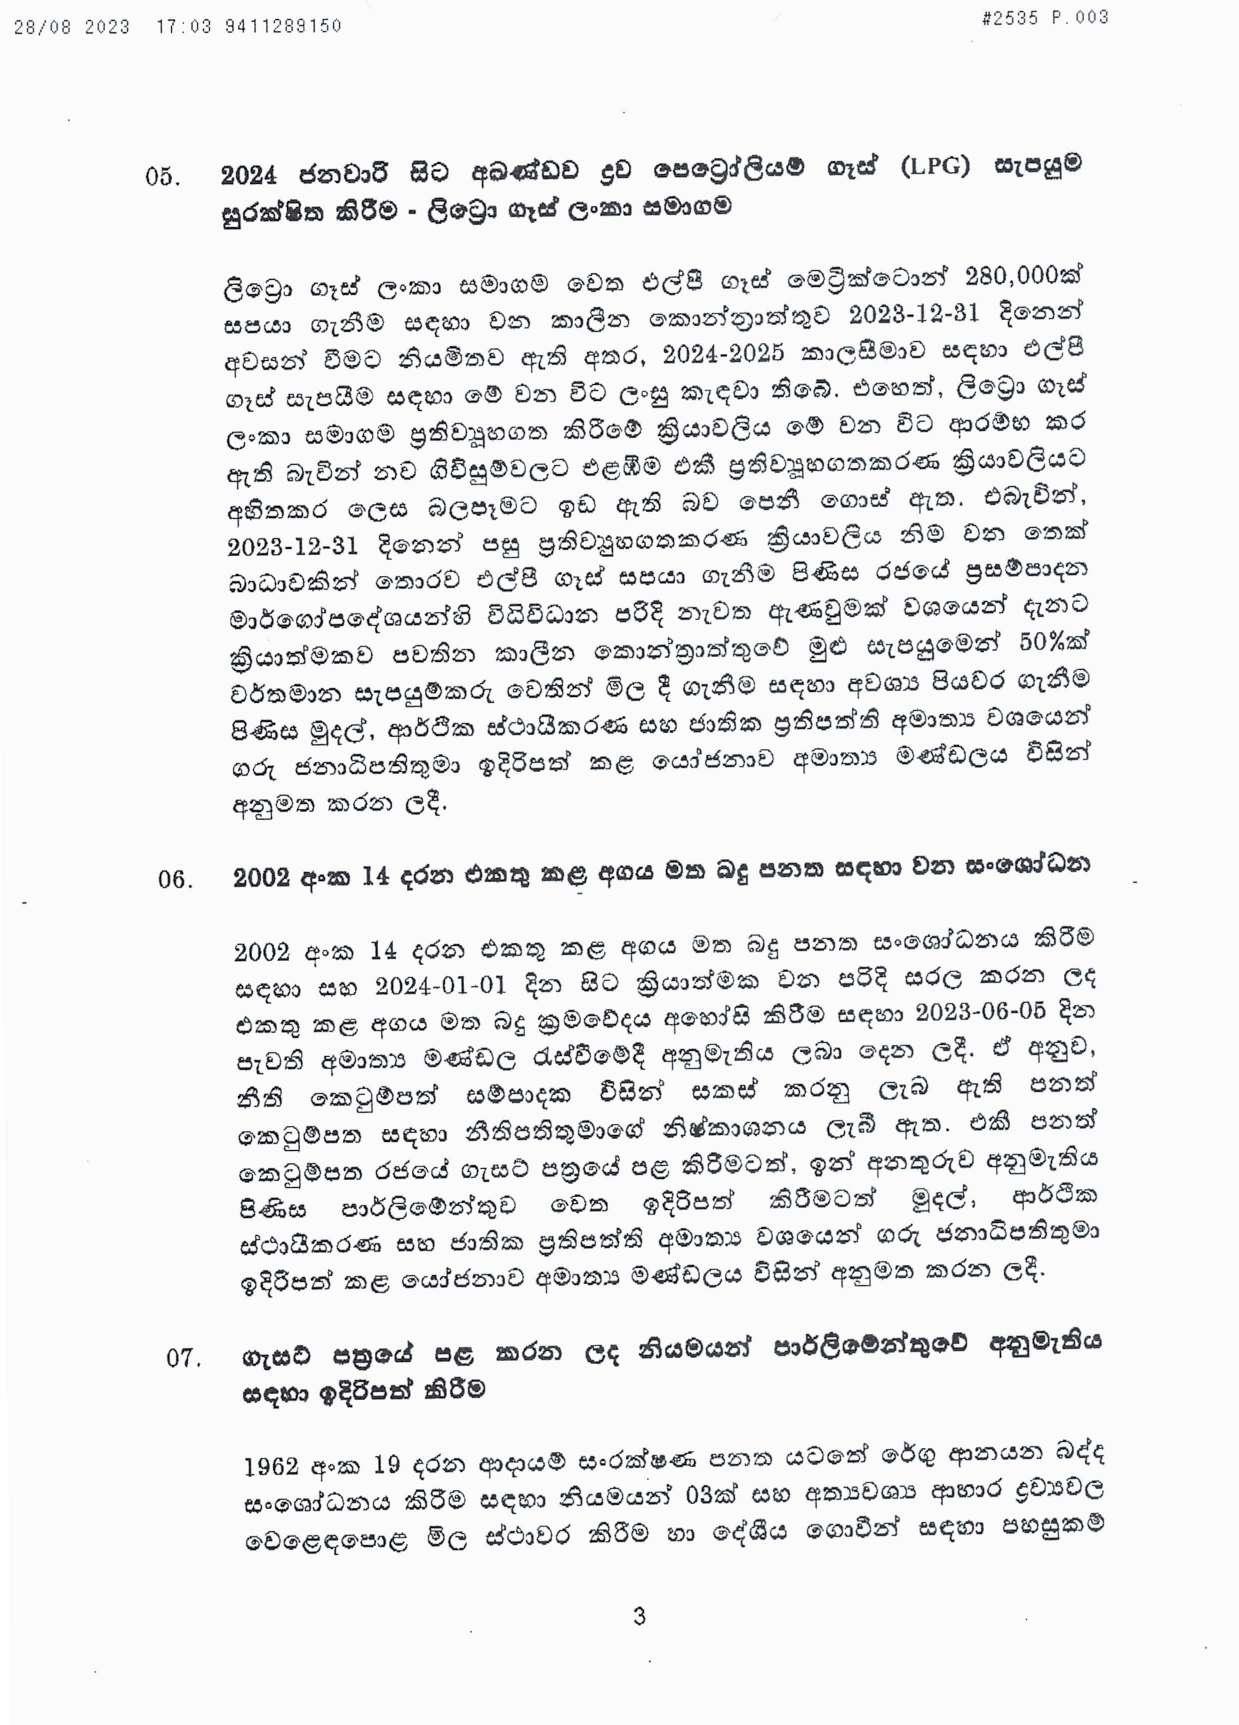 Cabinet Decision on 28.08.2023 page 003